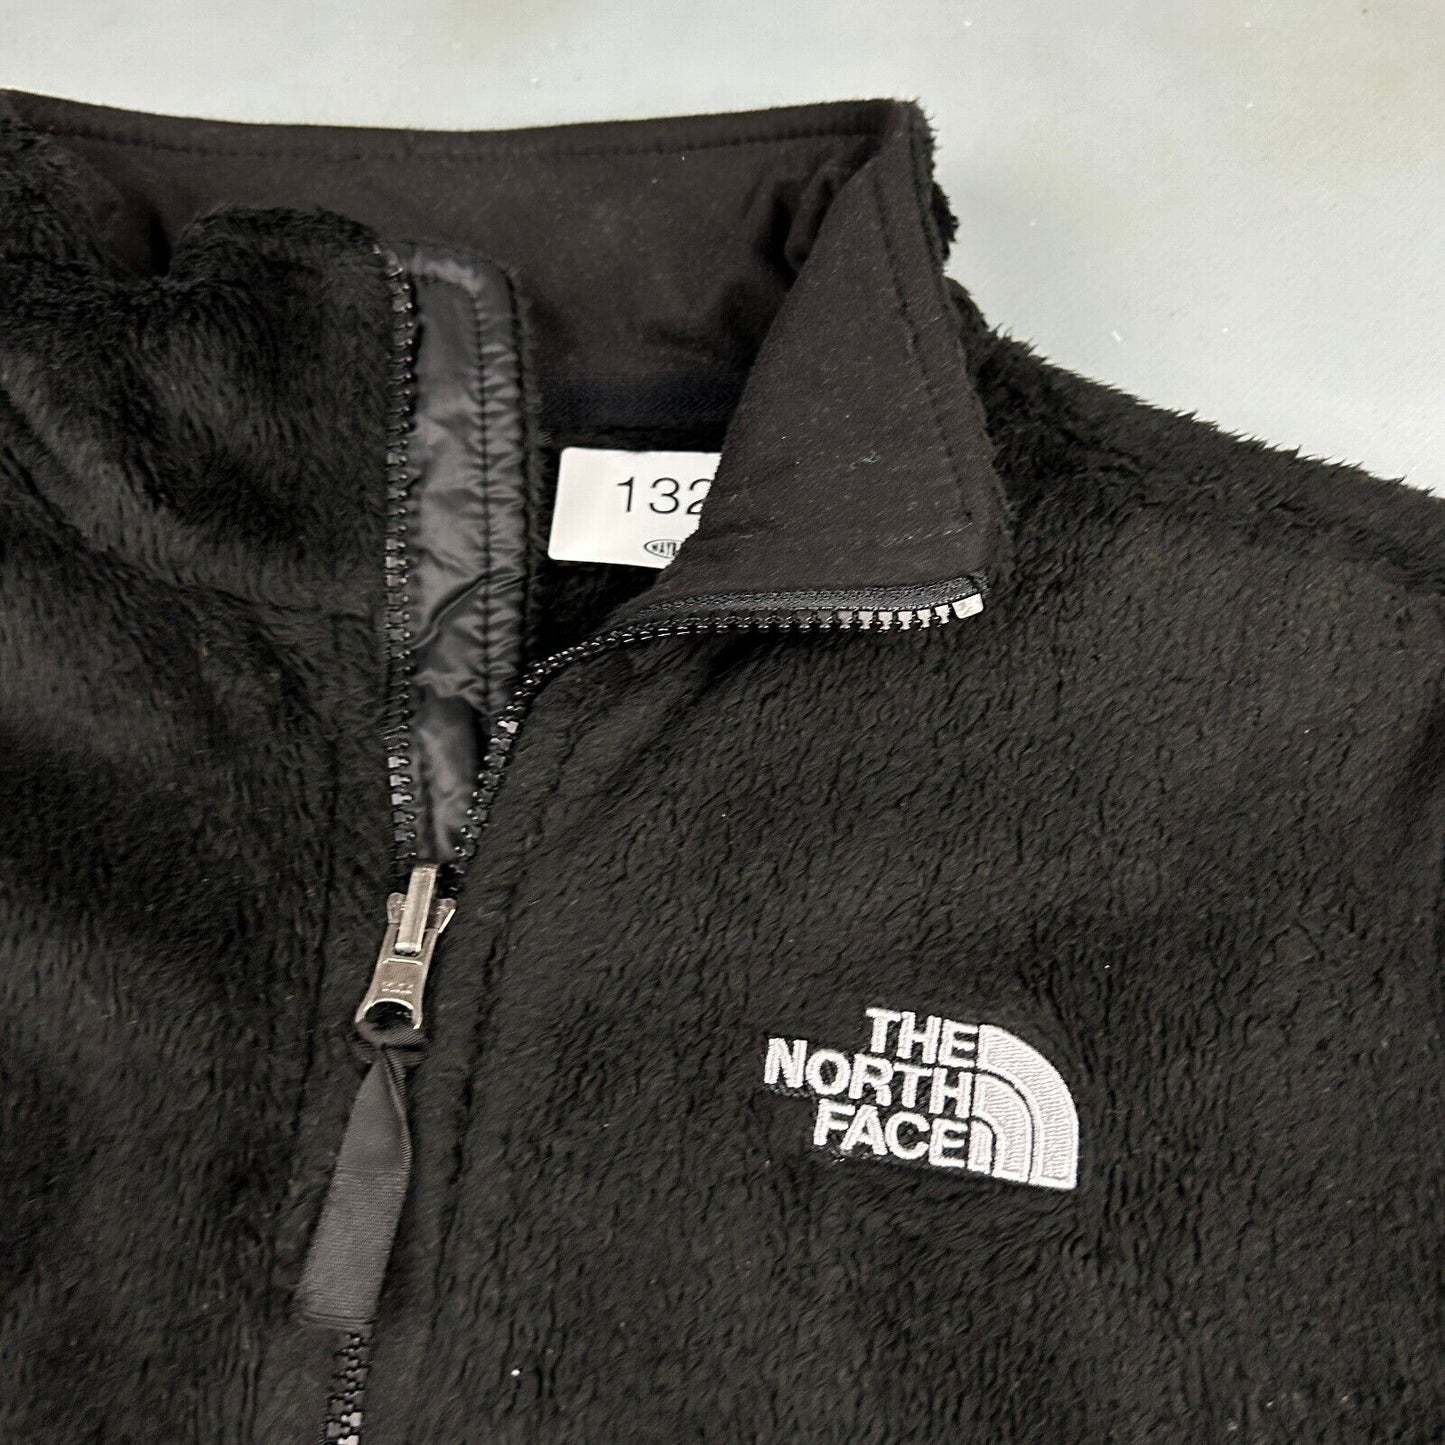 VINTAGE The North Face Black Zip Up Fleece Sweater sz Large Womens Adult